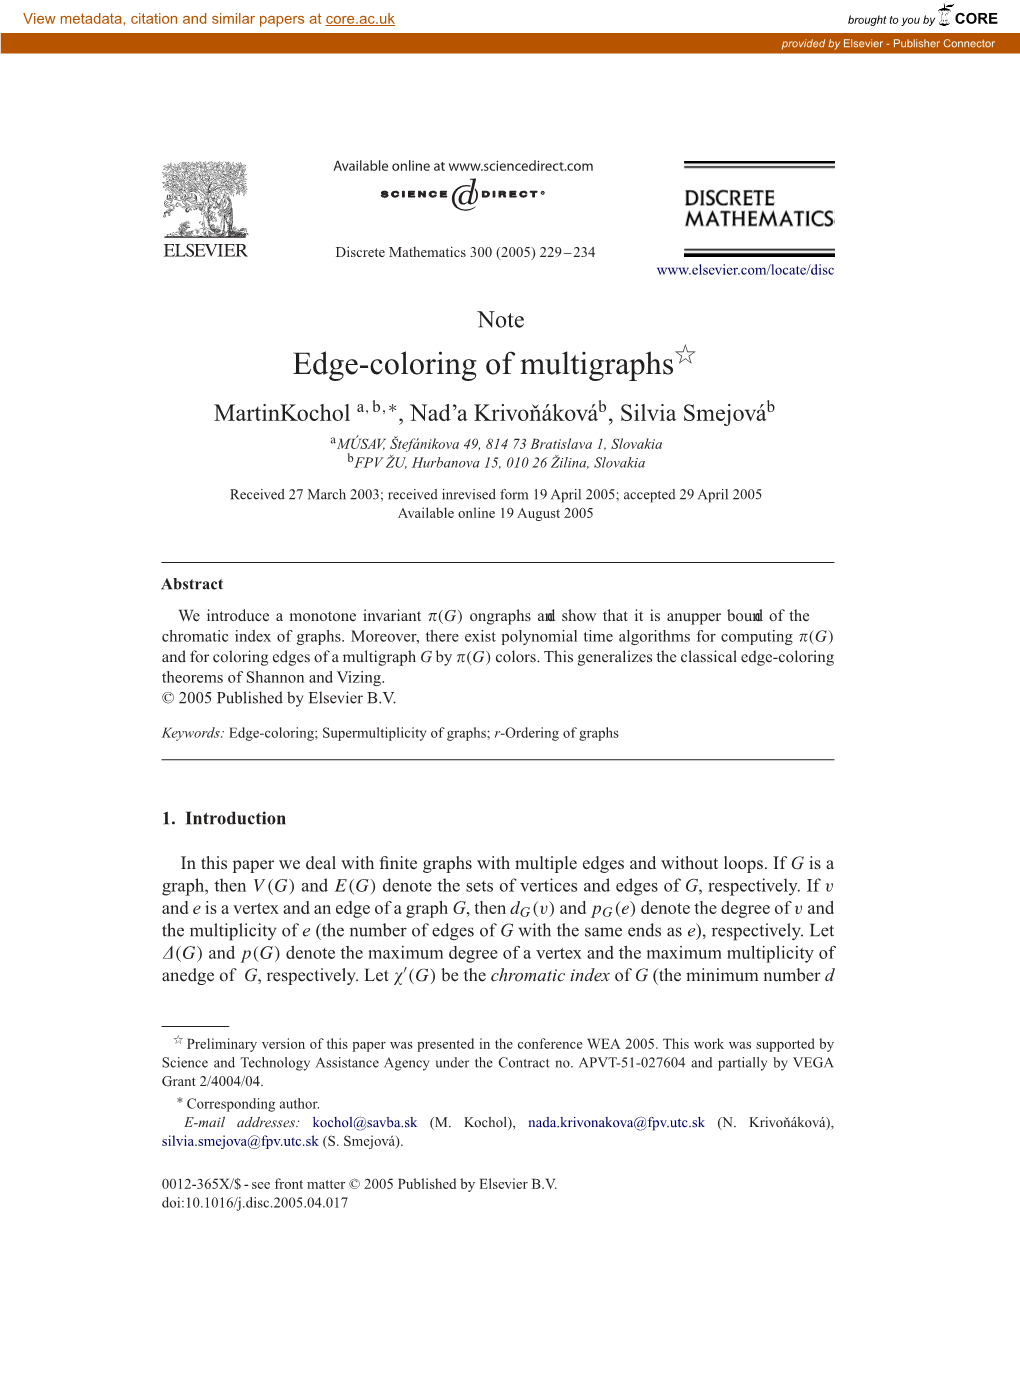 Edge-Coloring of Multigraphs